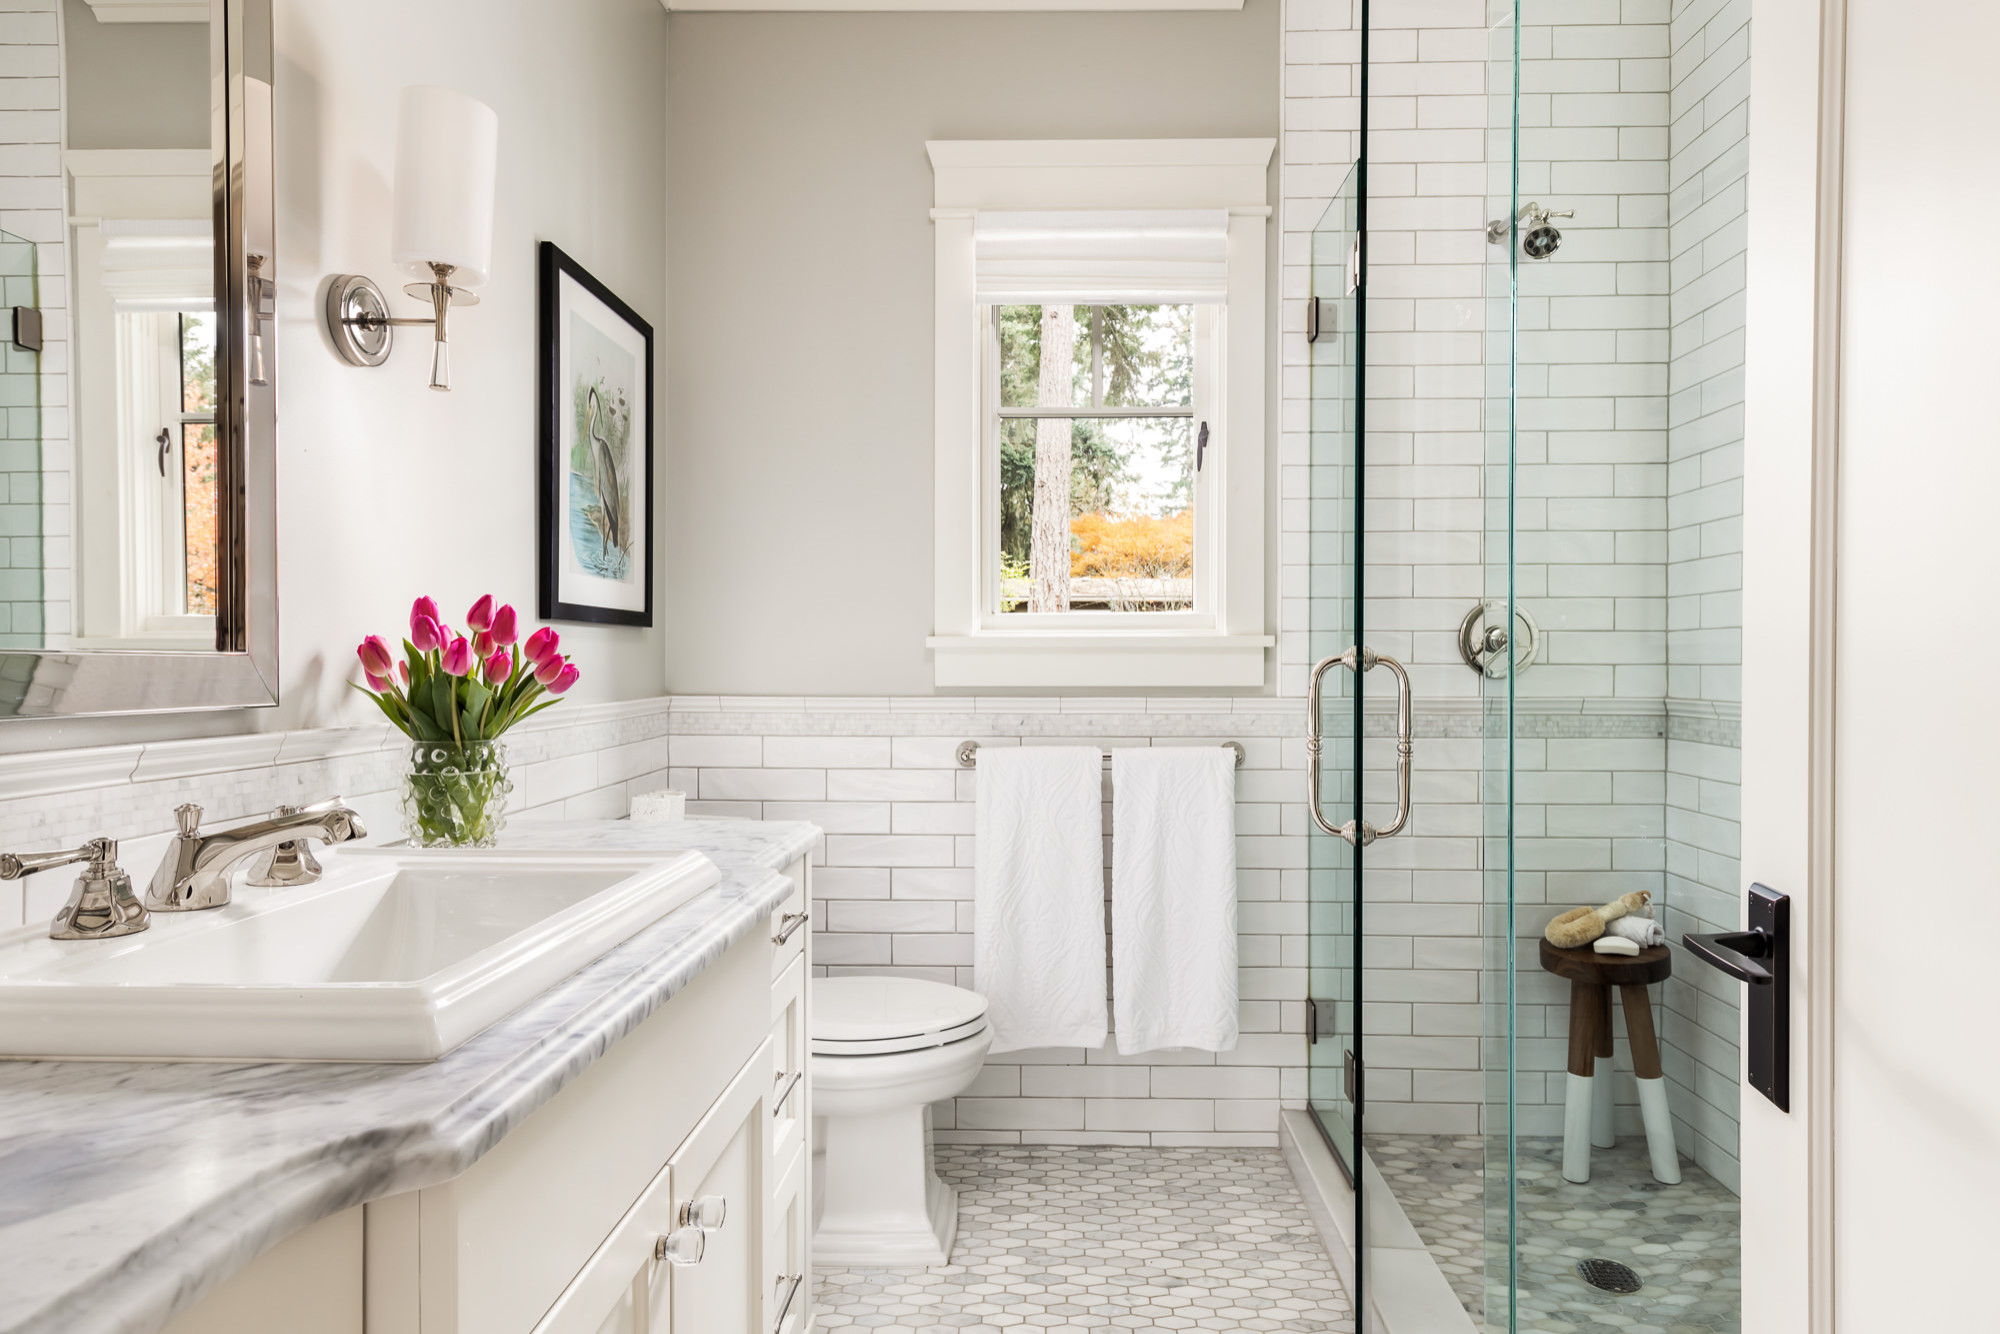 White subway tile is a timeless classic (from Houzz)